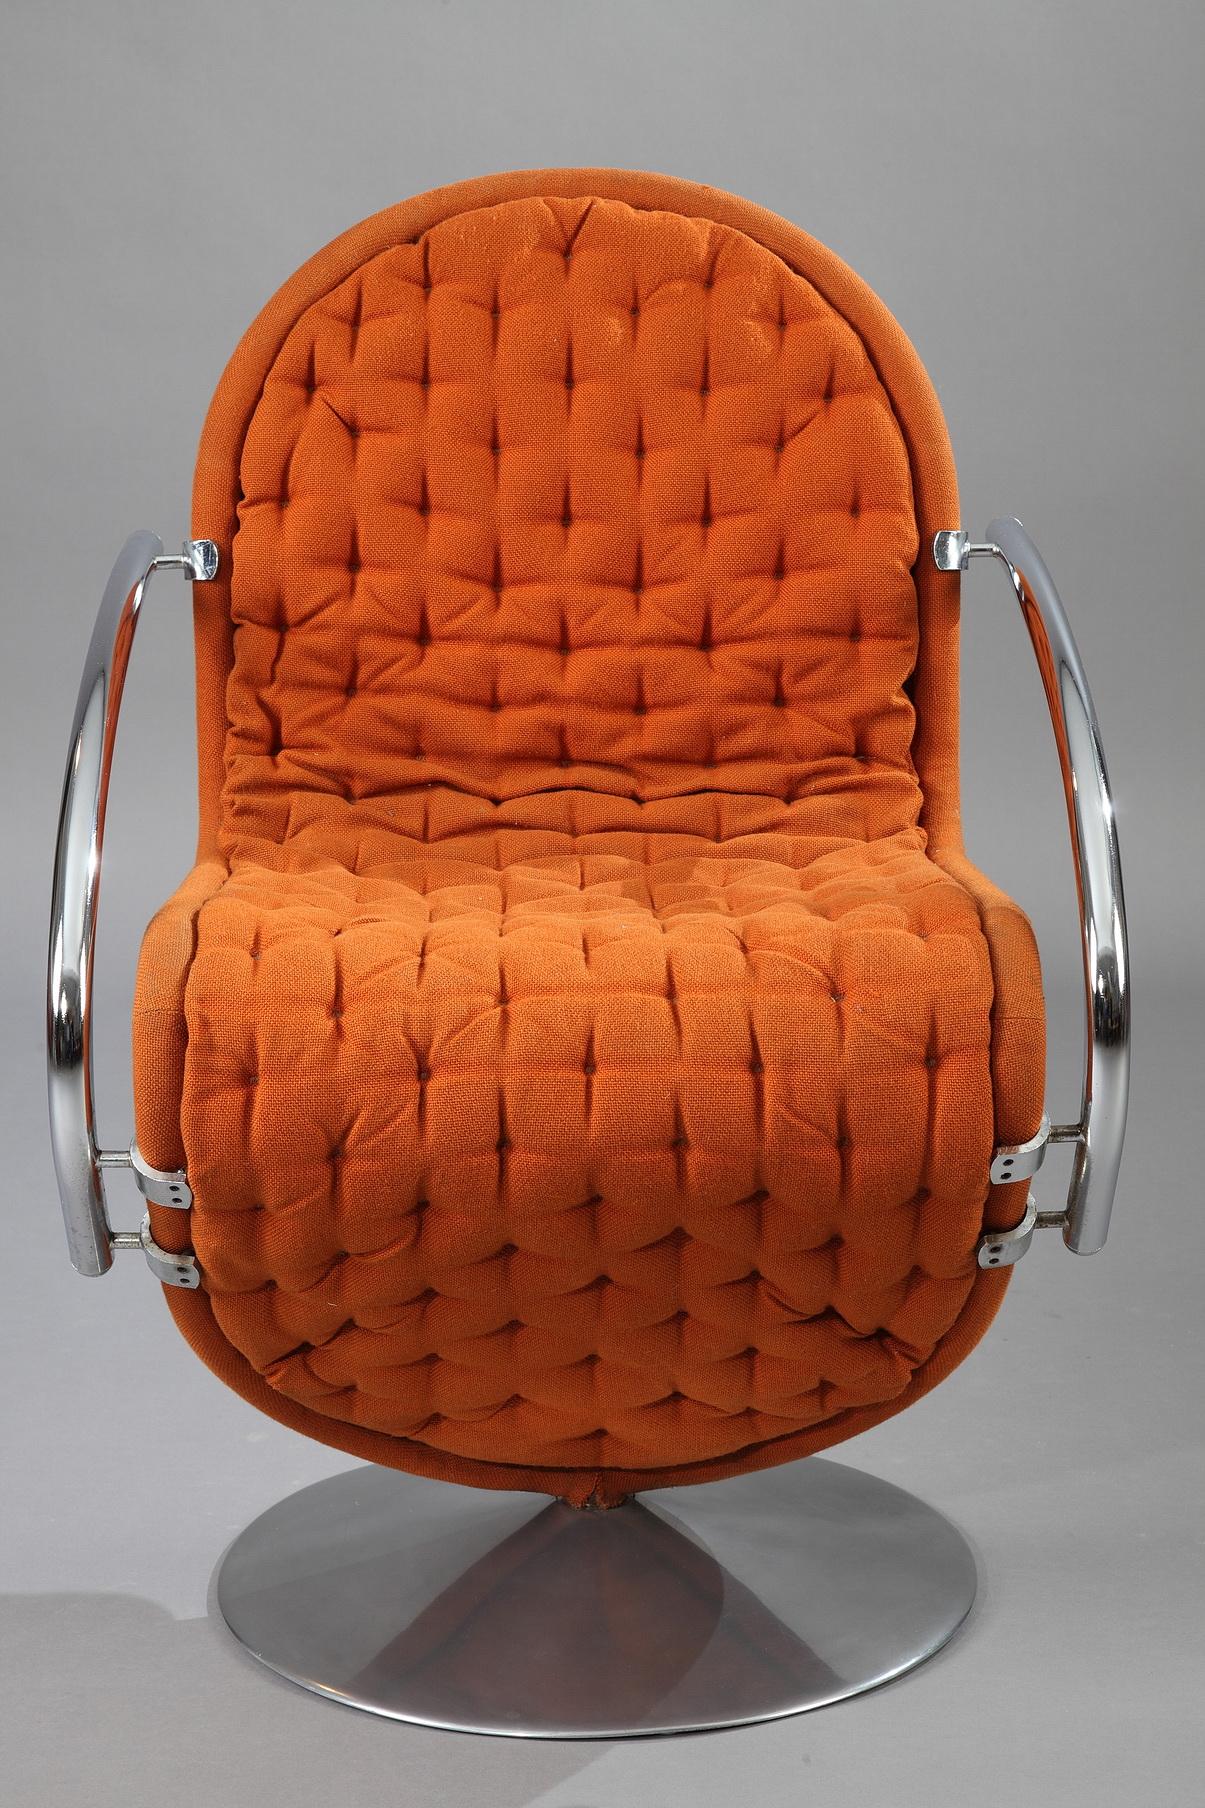 A swivel armchair from the 1-2-3 System series designed by Verner Panton. This armchair is button tufted in its original orange fabric. It rotates on a round polished aluminum base. We have 3 other chairs available. Small repair on one armchair.